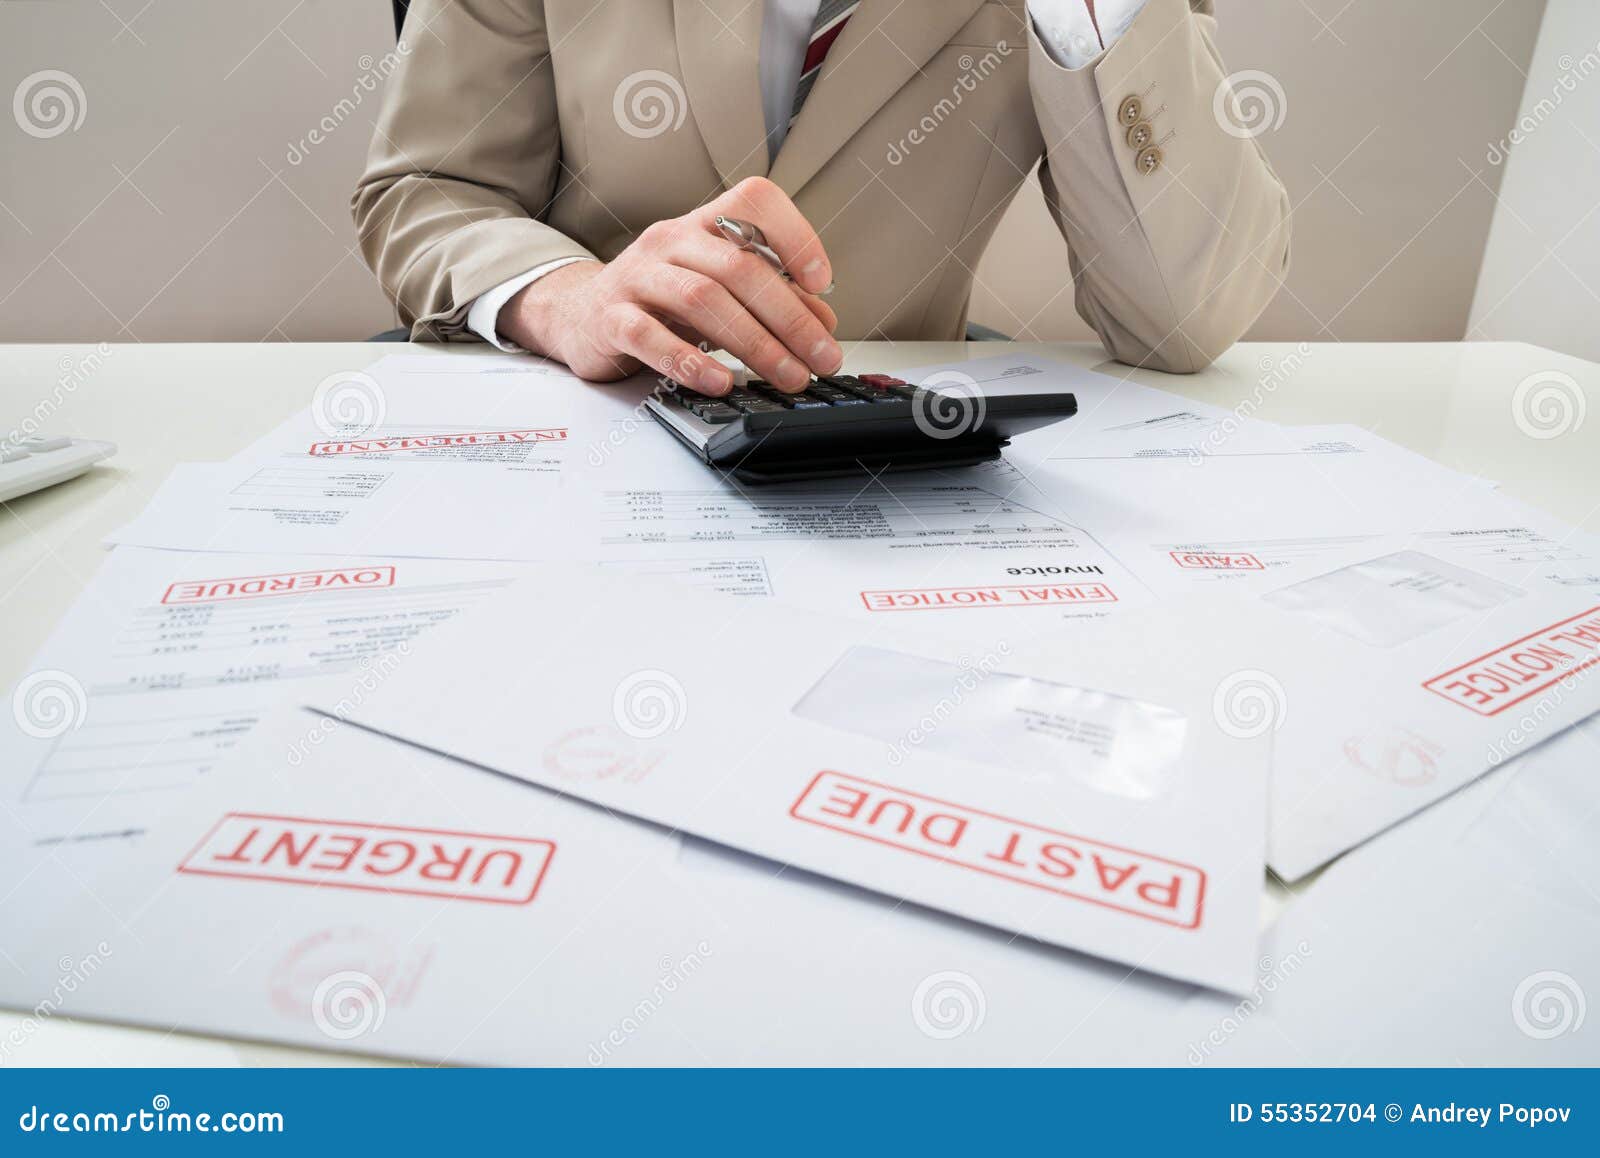 businessman with calculator and unpaid bills